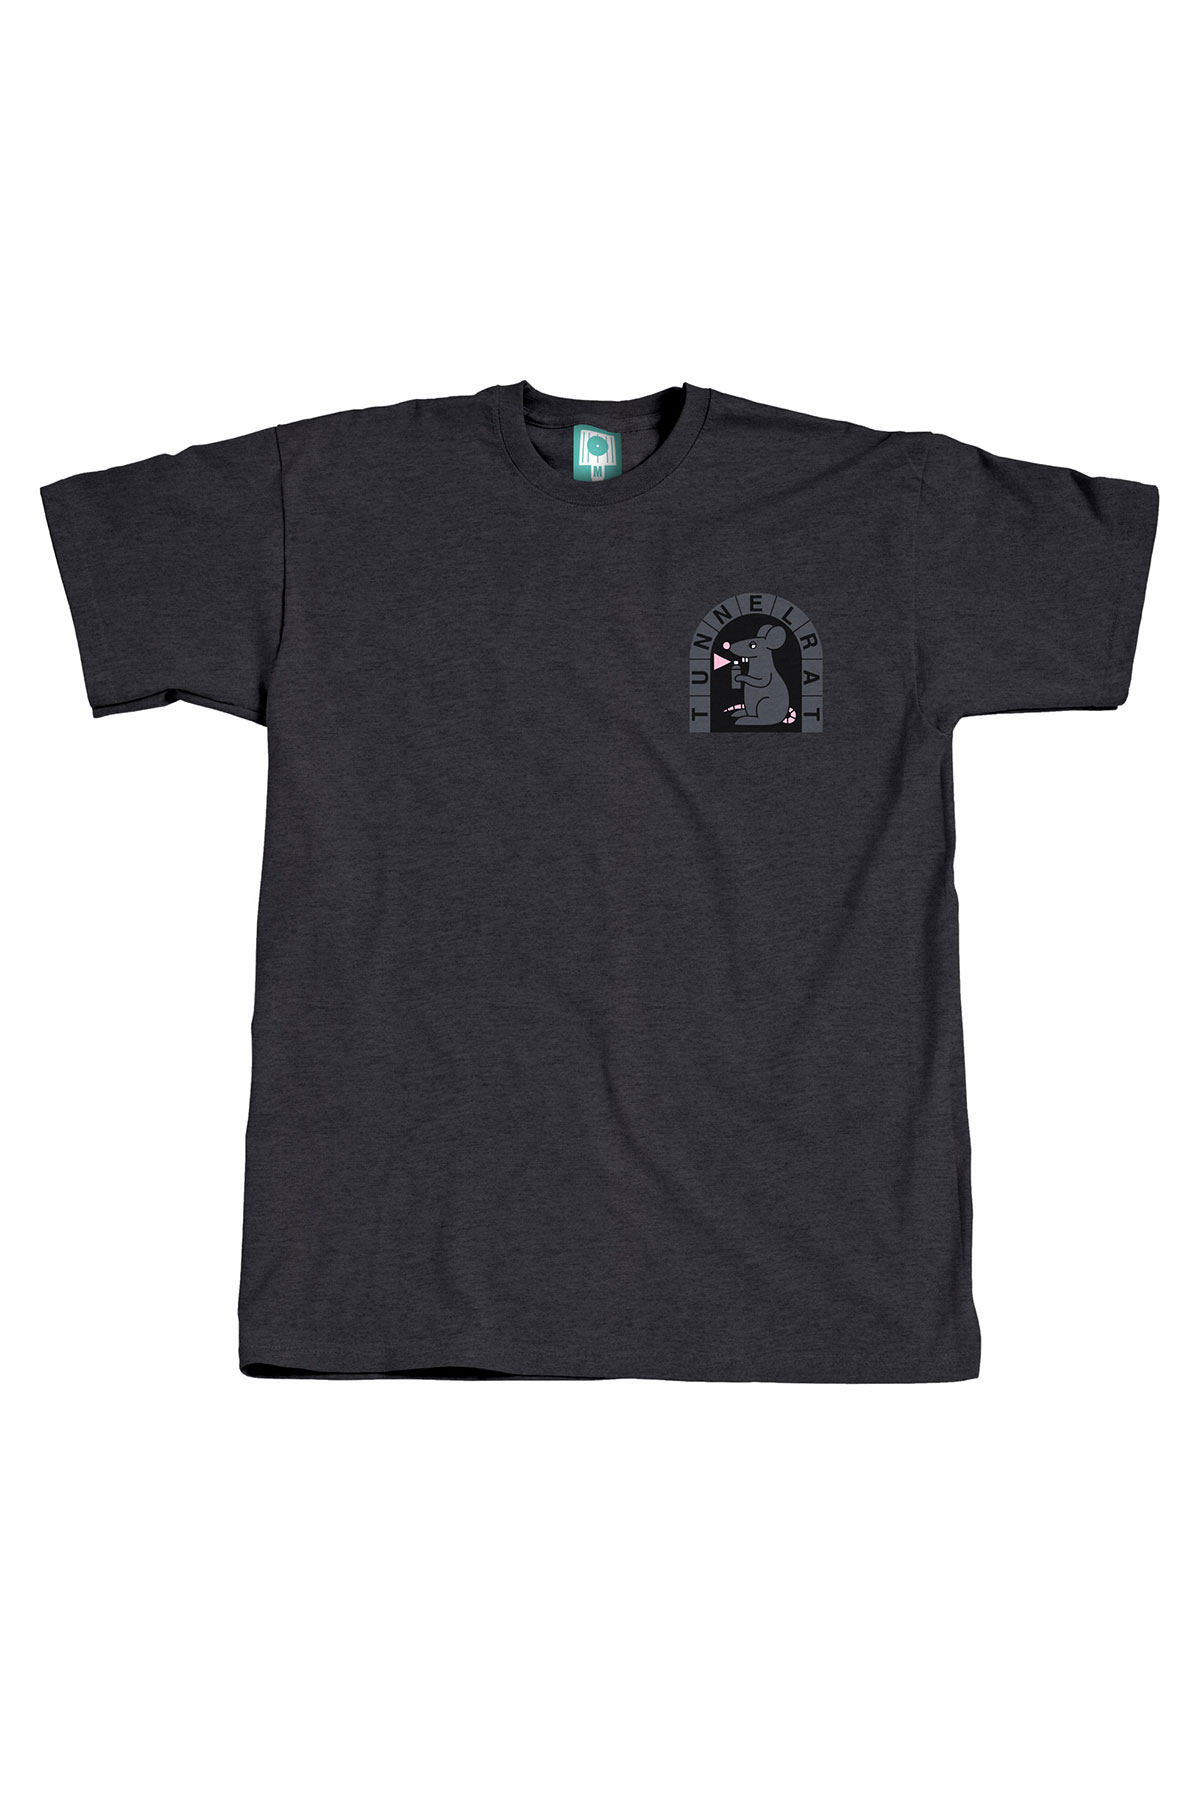 Montana TUNNEL RAT Charcoal T-Shirt by Matter Of